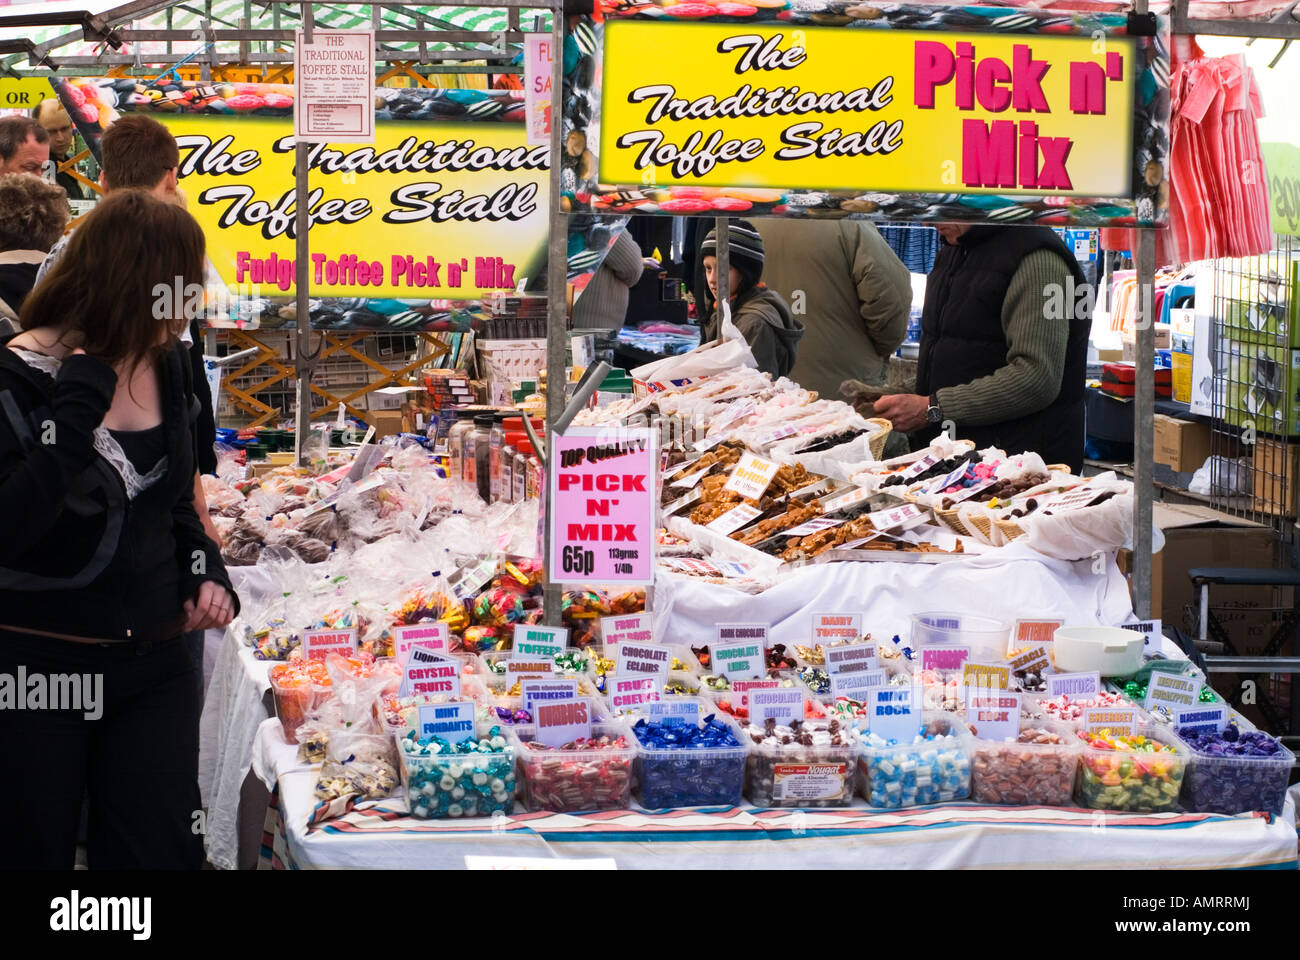 Der traditionelle Toffee-Stall in England Stockfoto